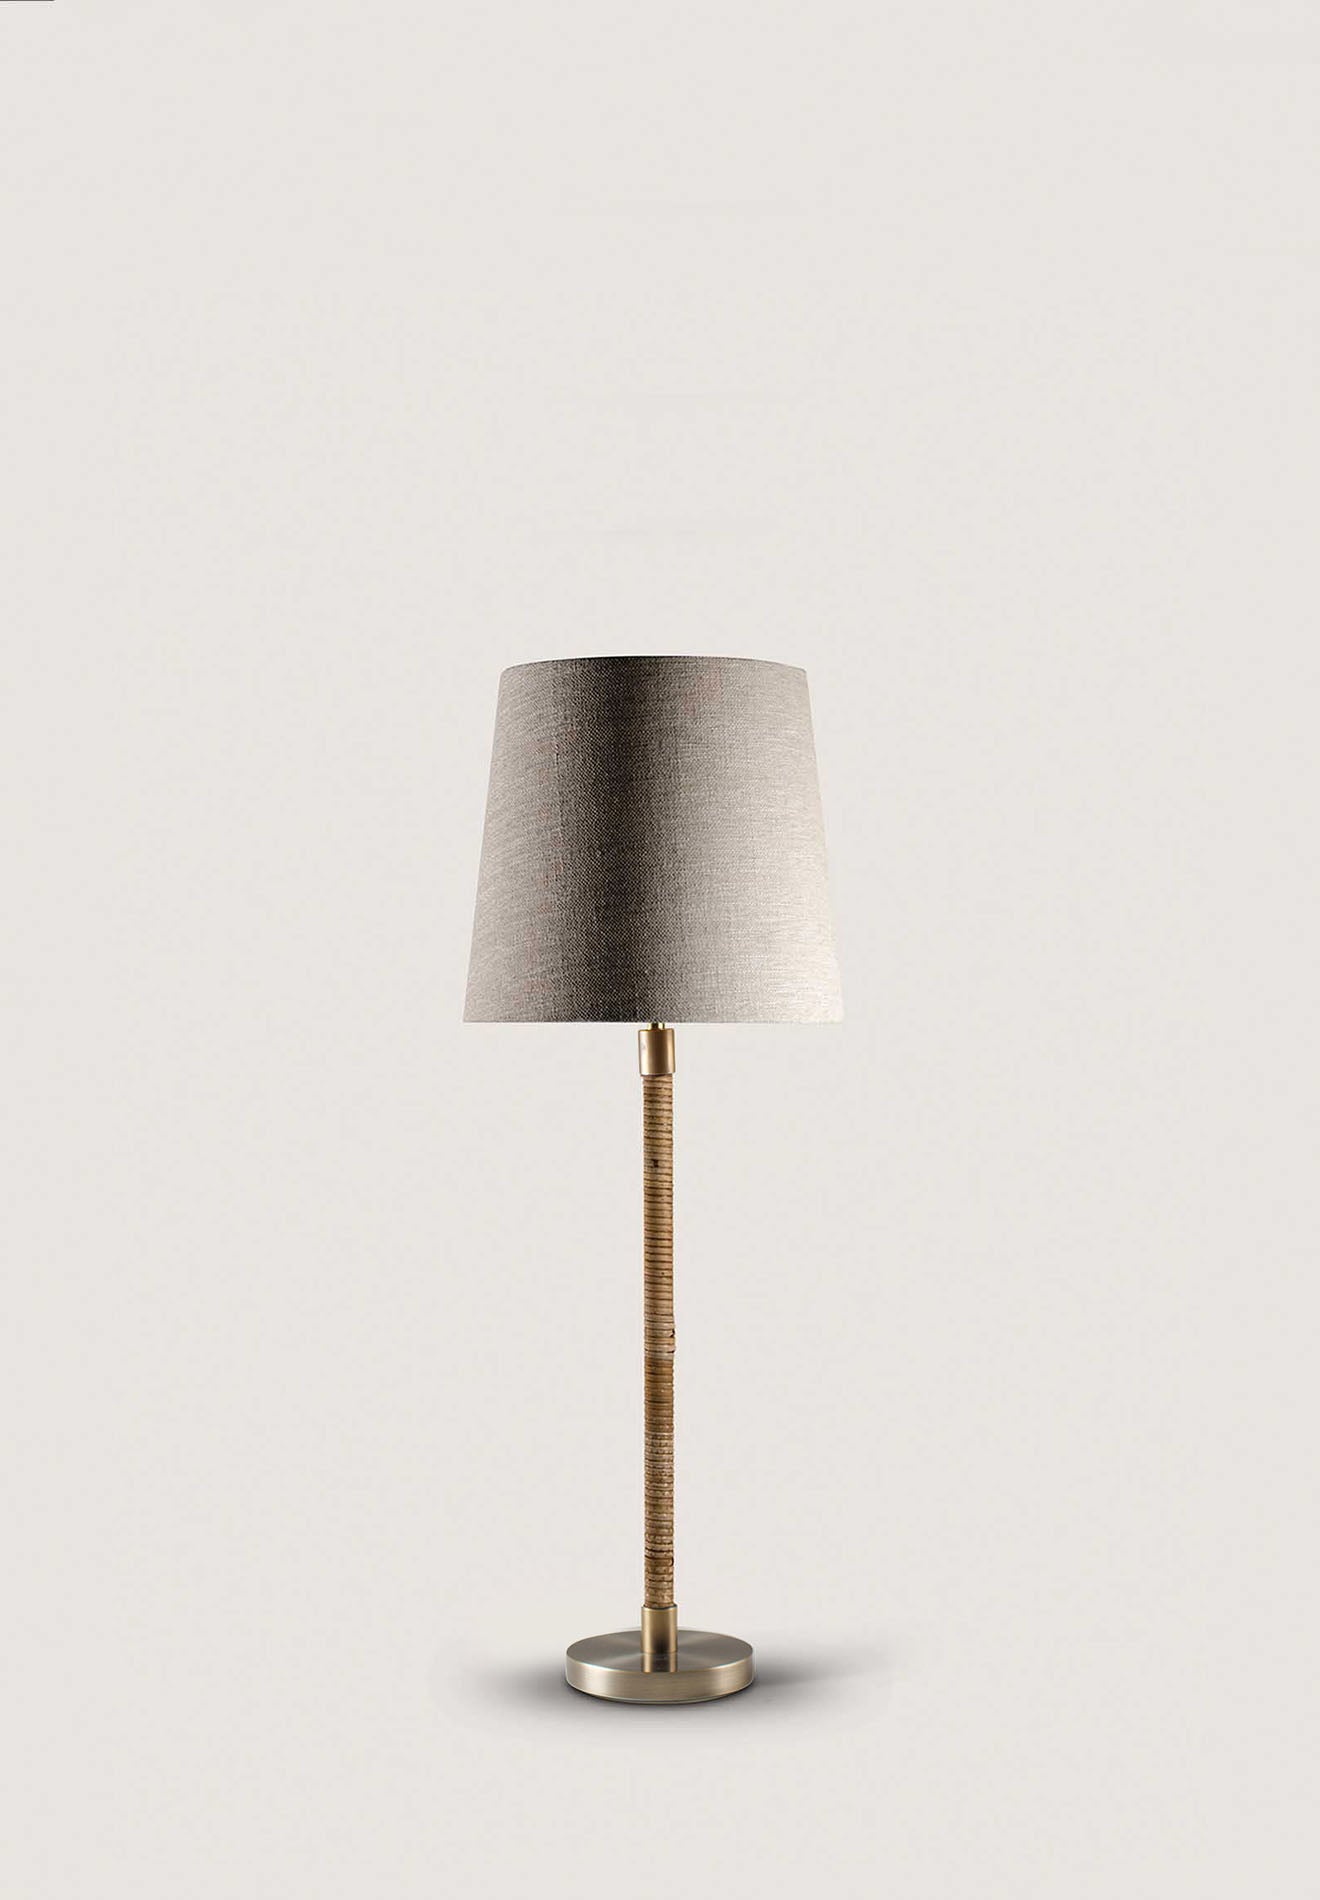 Dark Cane in Antiqued Brass shown with 10" Bongo Natural Linen with Cream Card lining